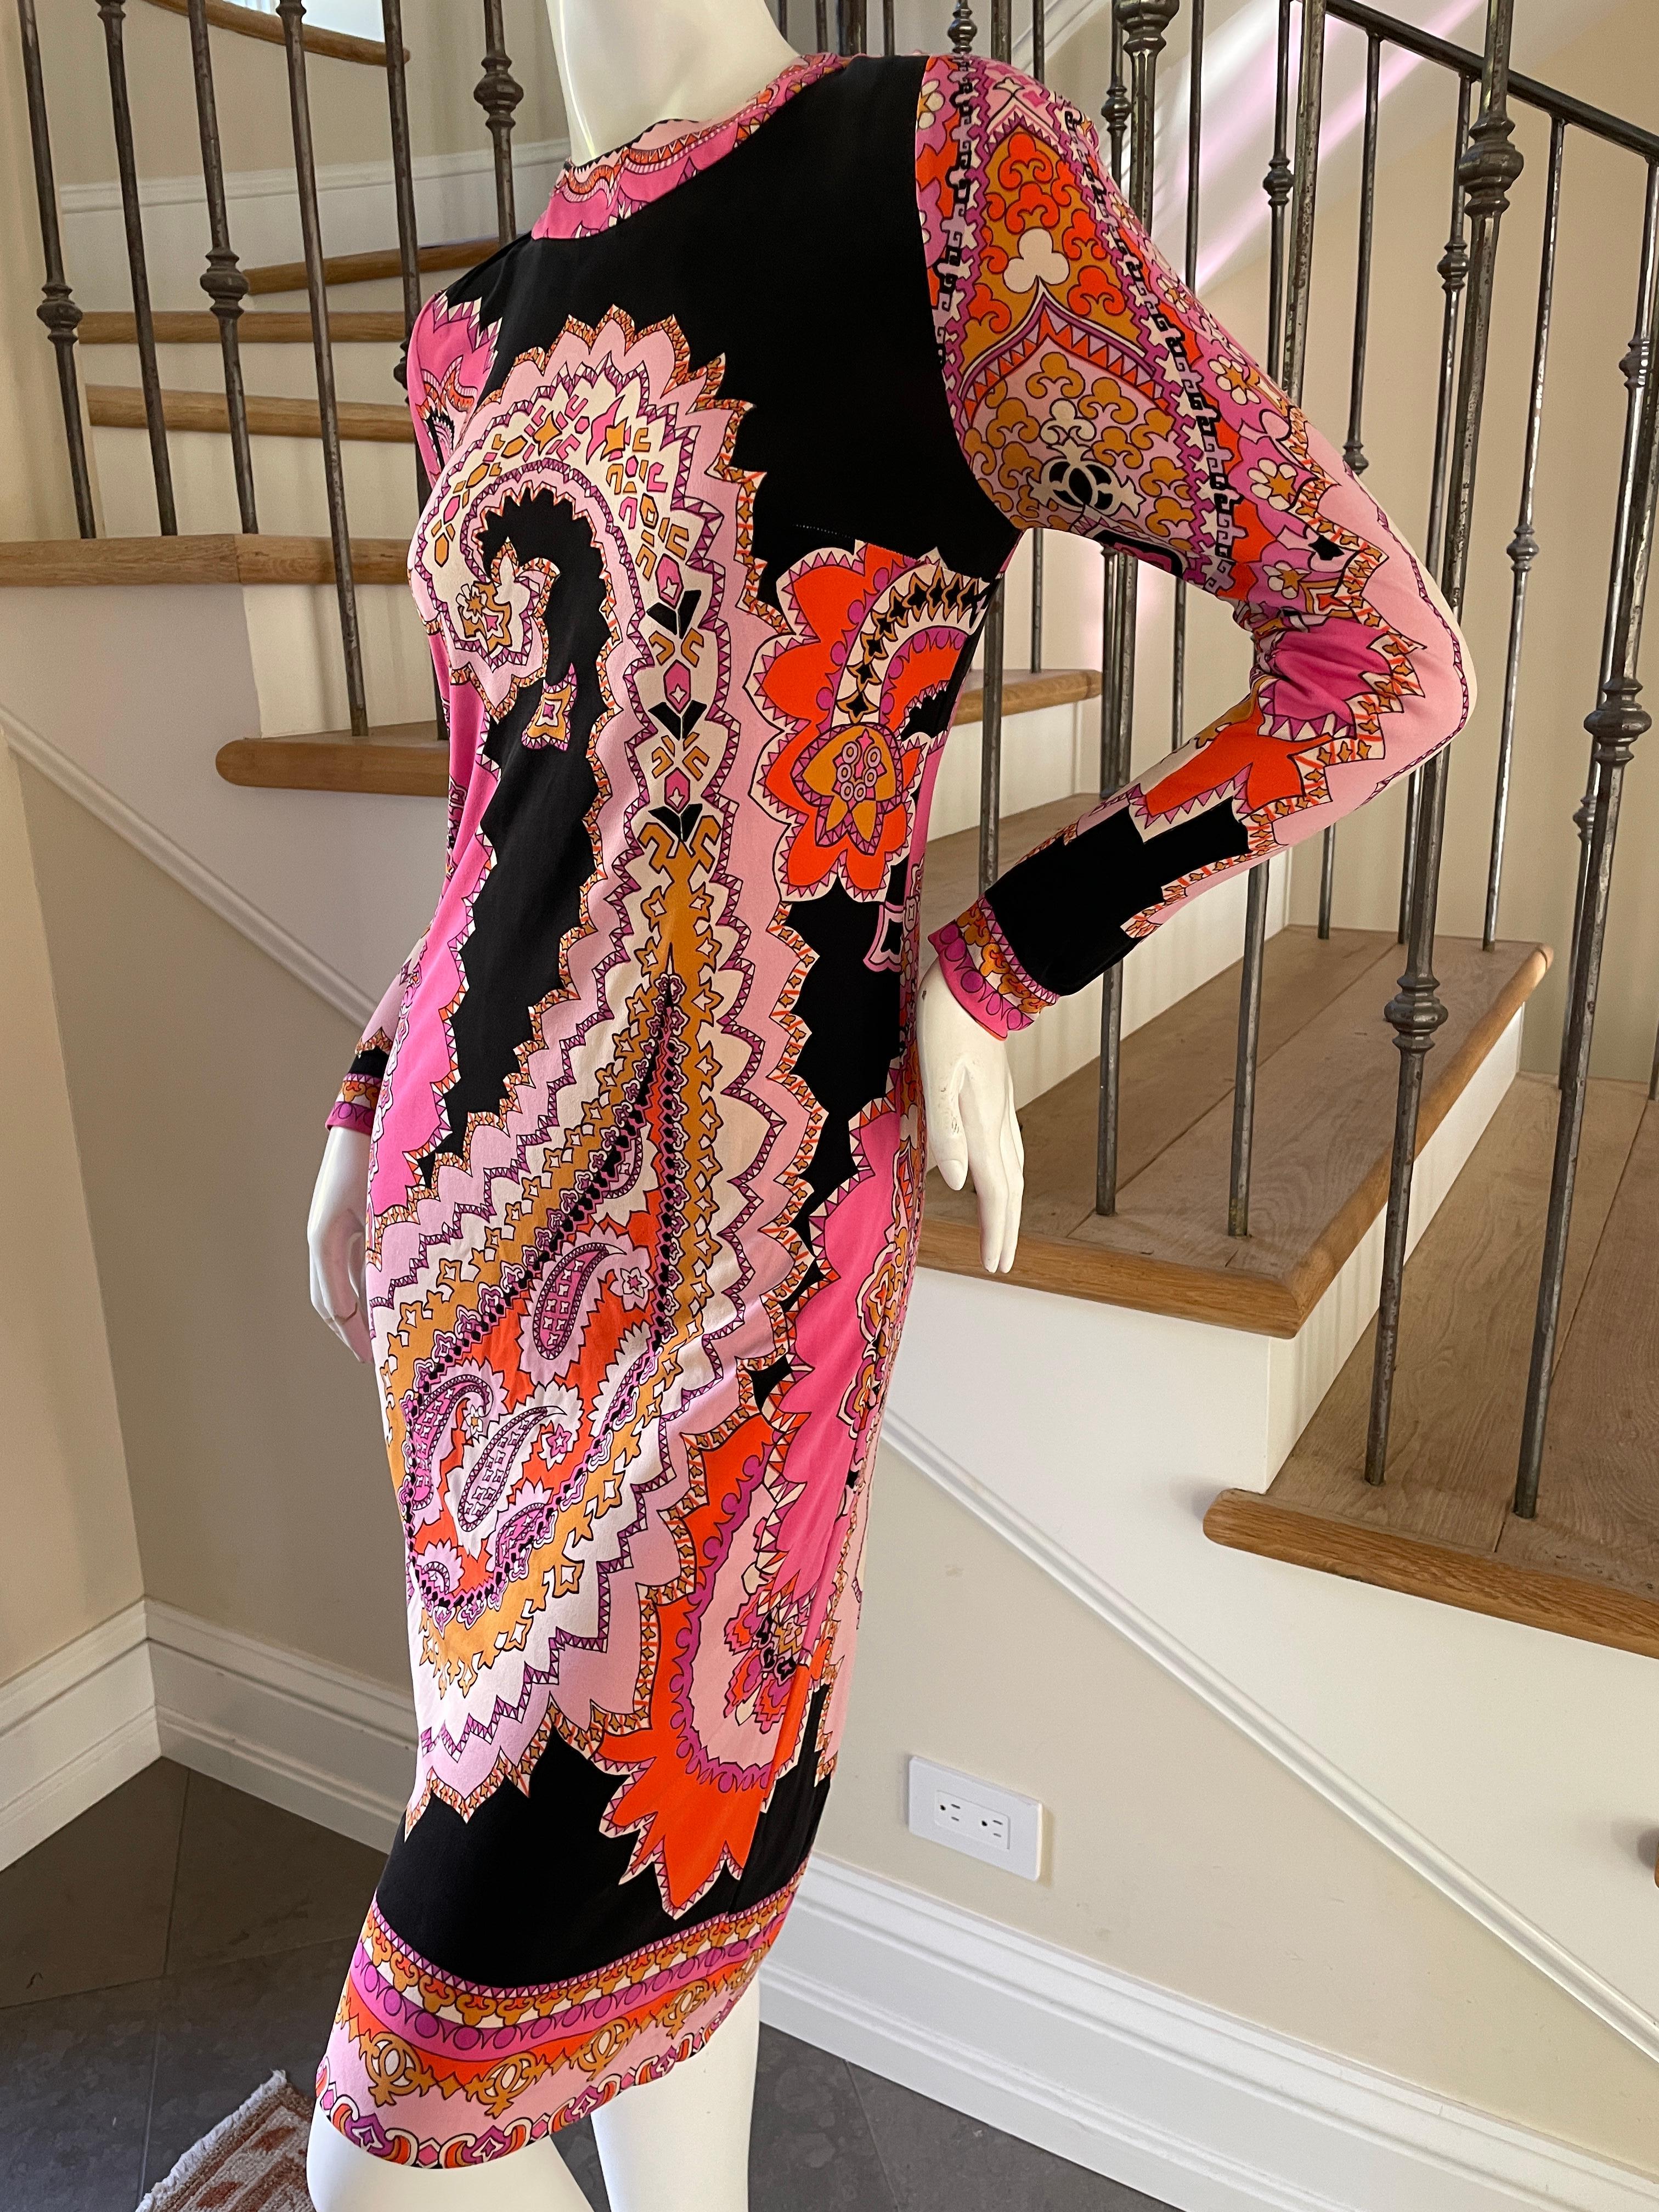  Leonard Paris Vintage 70's Pink Paisley Print Silk Jersey Dress In Excellent Condition For Sale In Cloverdale, CA